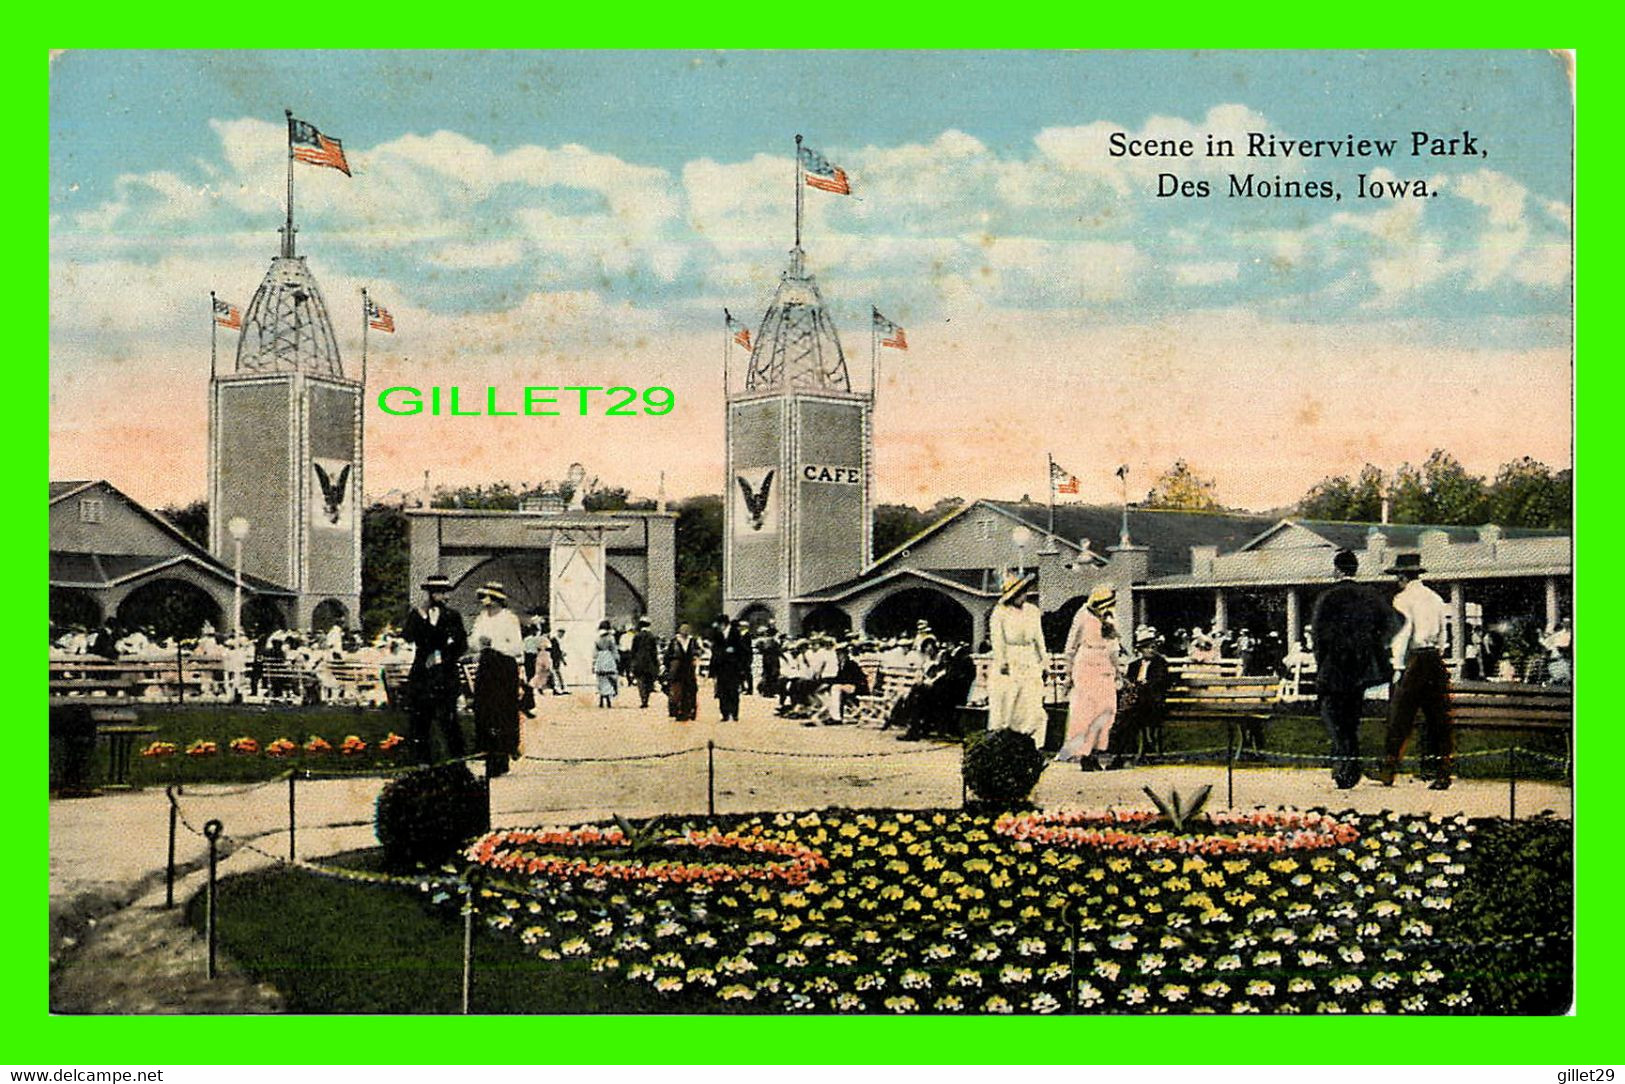 DES MOINES, IOWA - SCENE IN RIVERVIEW PARK - WELL ANIMATED WITH PEOPLES - TRAVEL IN 1925 - ENOS B. HUNT - - Des Moines